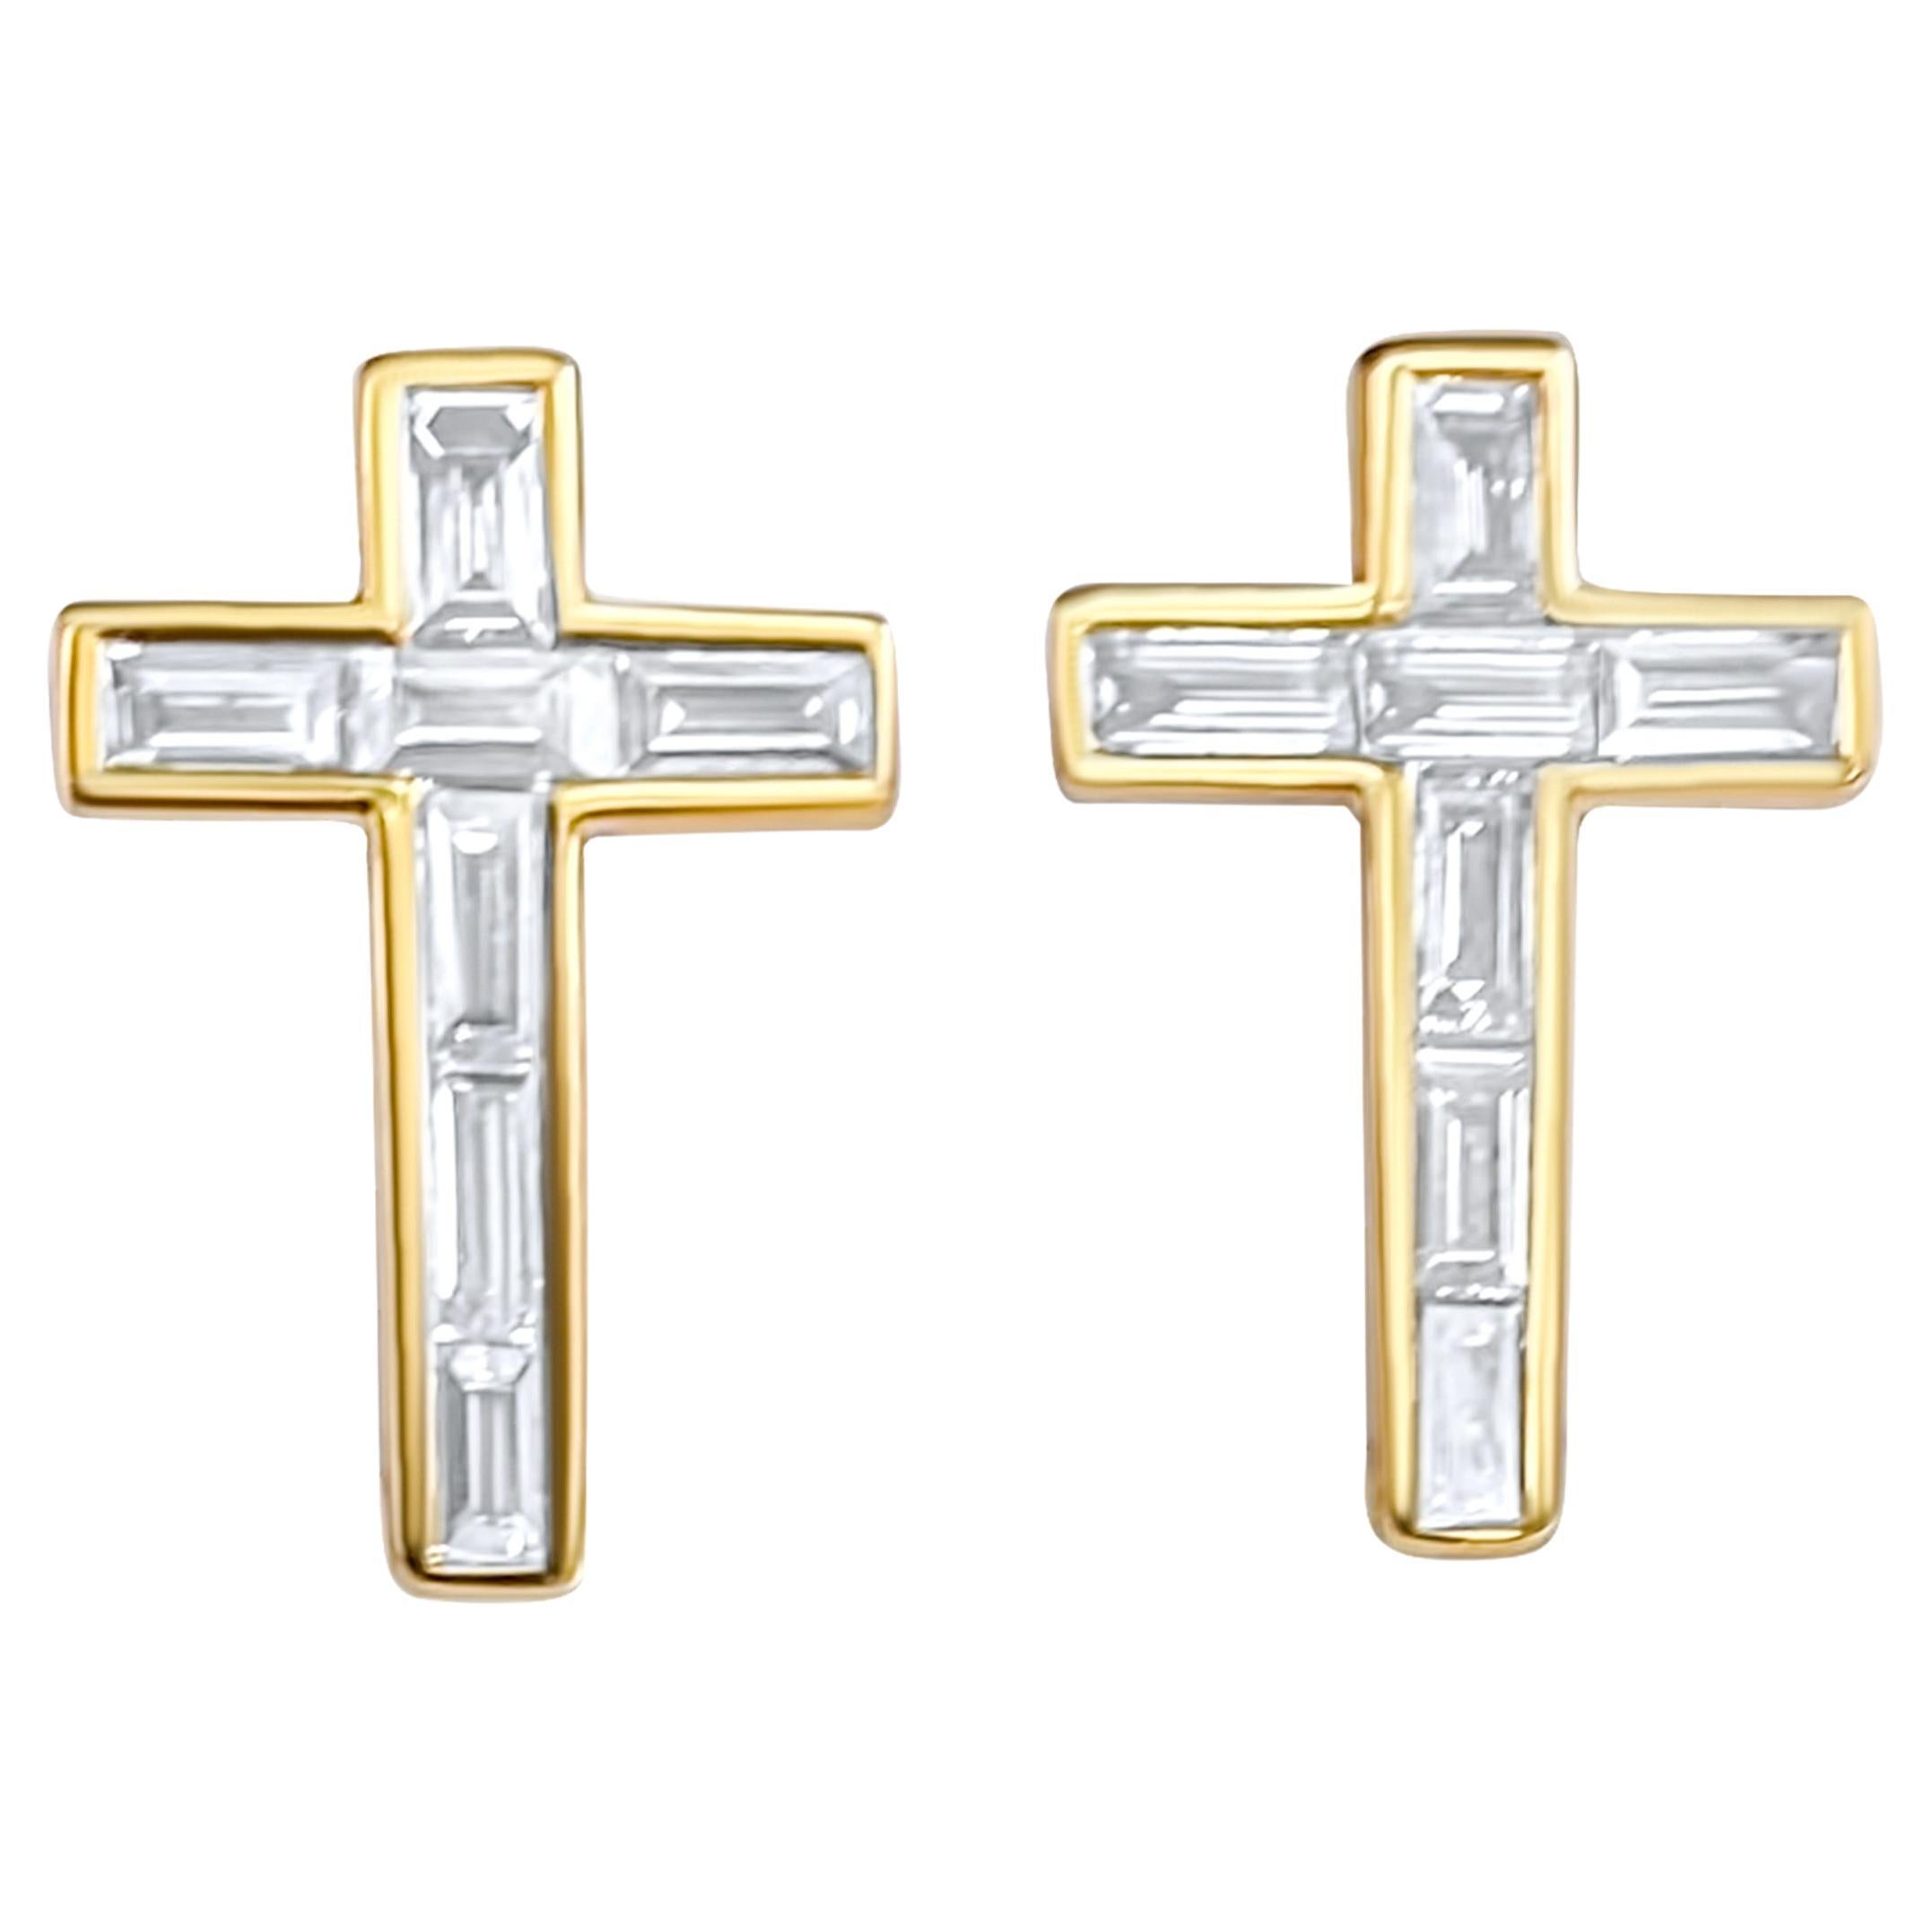 Add a bit of luxury and edginess to your classic huggie with a new square format. These Cross Huggie Earrings come in two sizes, set in solid 14k yellow gold. Can’t find a color you like? Please reach out for addition variations made just for